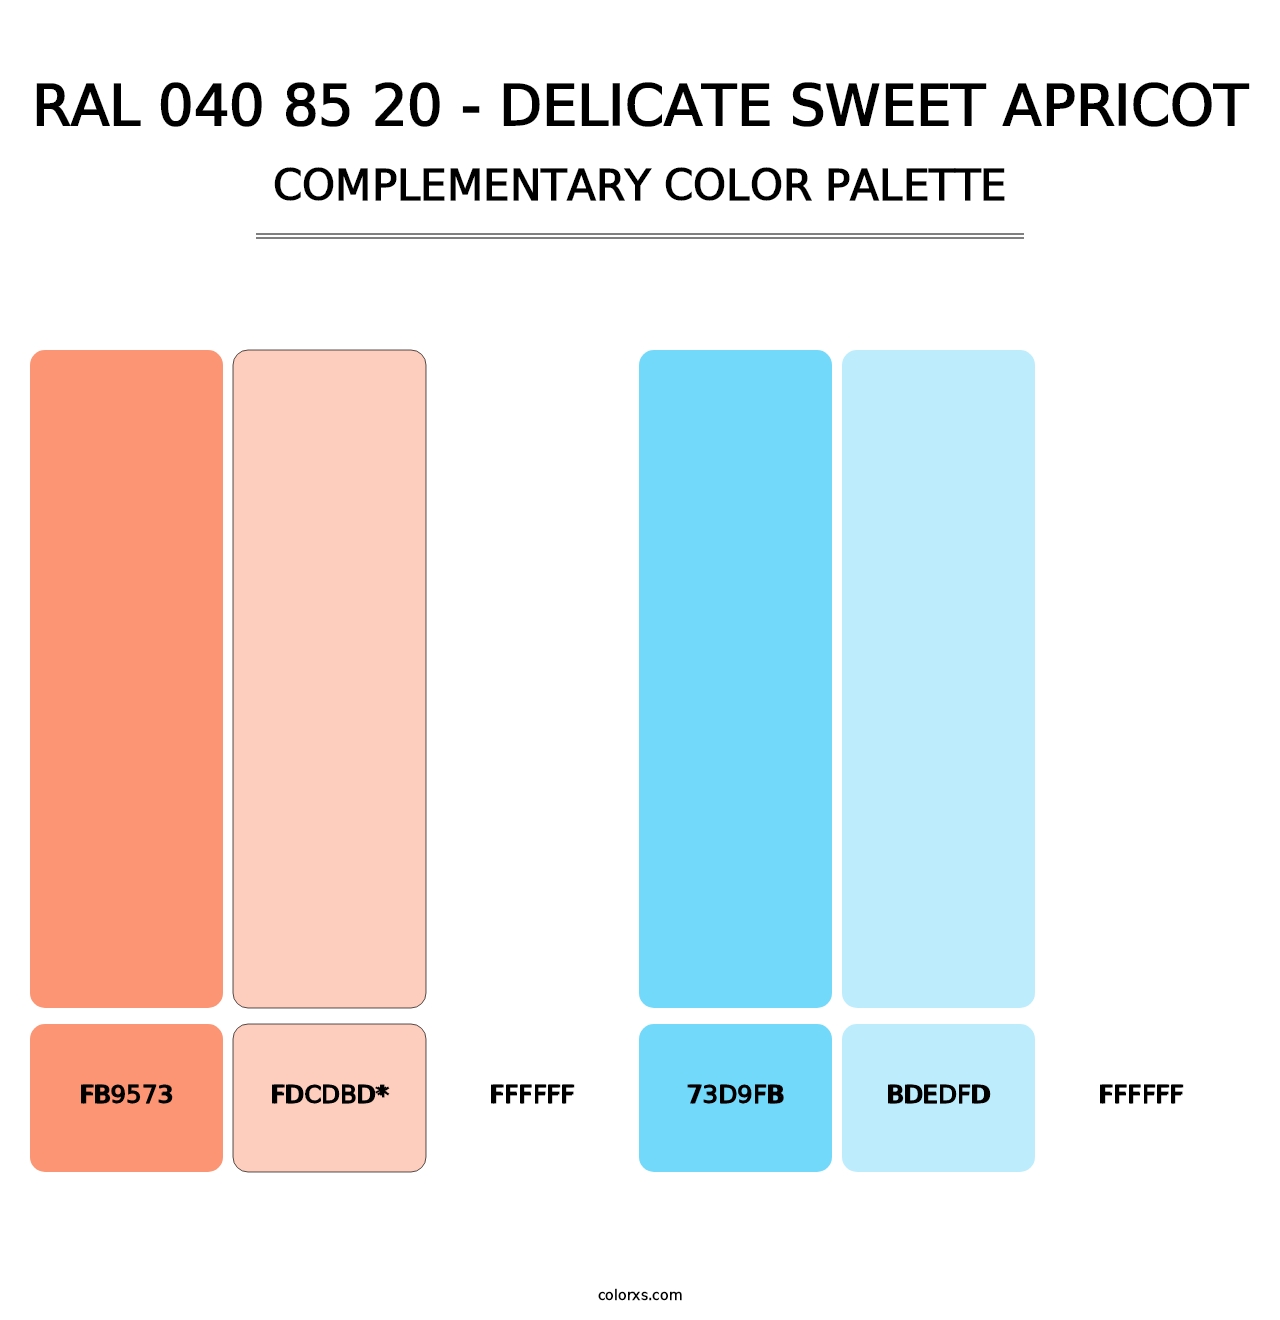 RAL 040 85 20 - Delicate Sweet Apricot - Complementary Color Palette